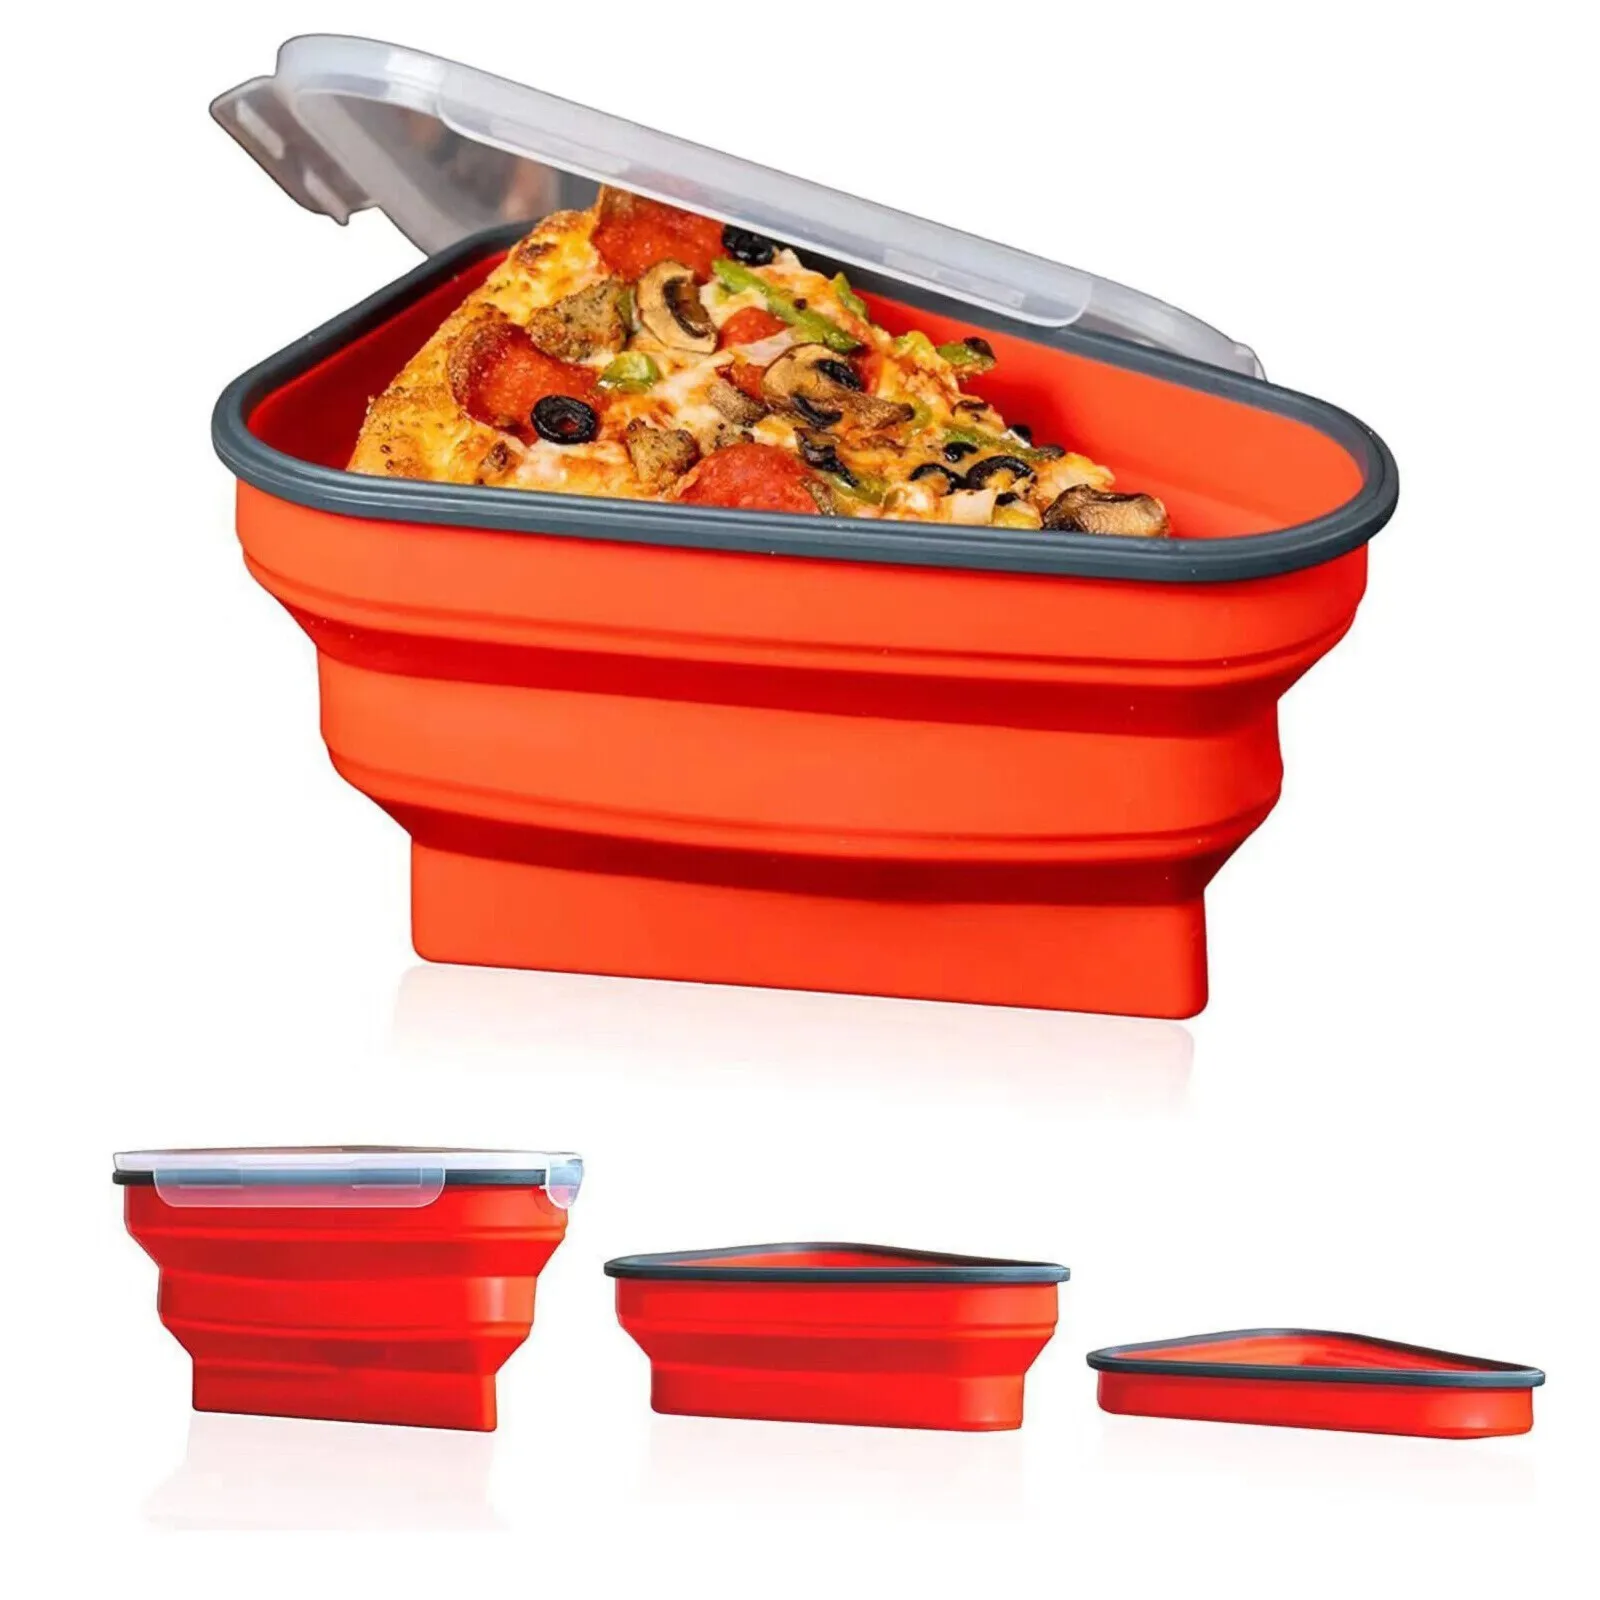 https://ae01.alicdn.com/kf/S3cb9fd1c93ab4d16a921476c09b48349s/Kitchen-Organizing-Reusable-Pizza-Slice-Storage-Container-The-Perfect-Pizza-Box-With-5-Snap-Lock-Food.jpg